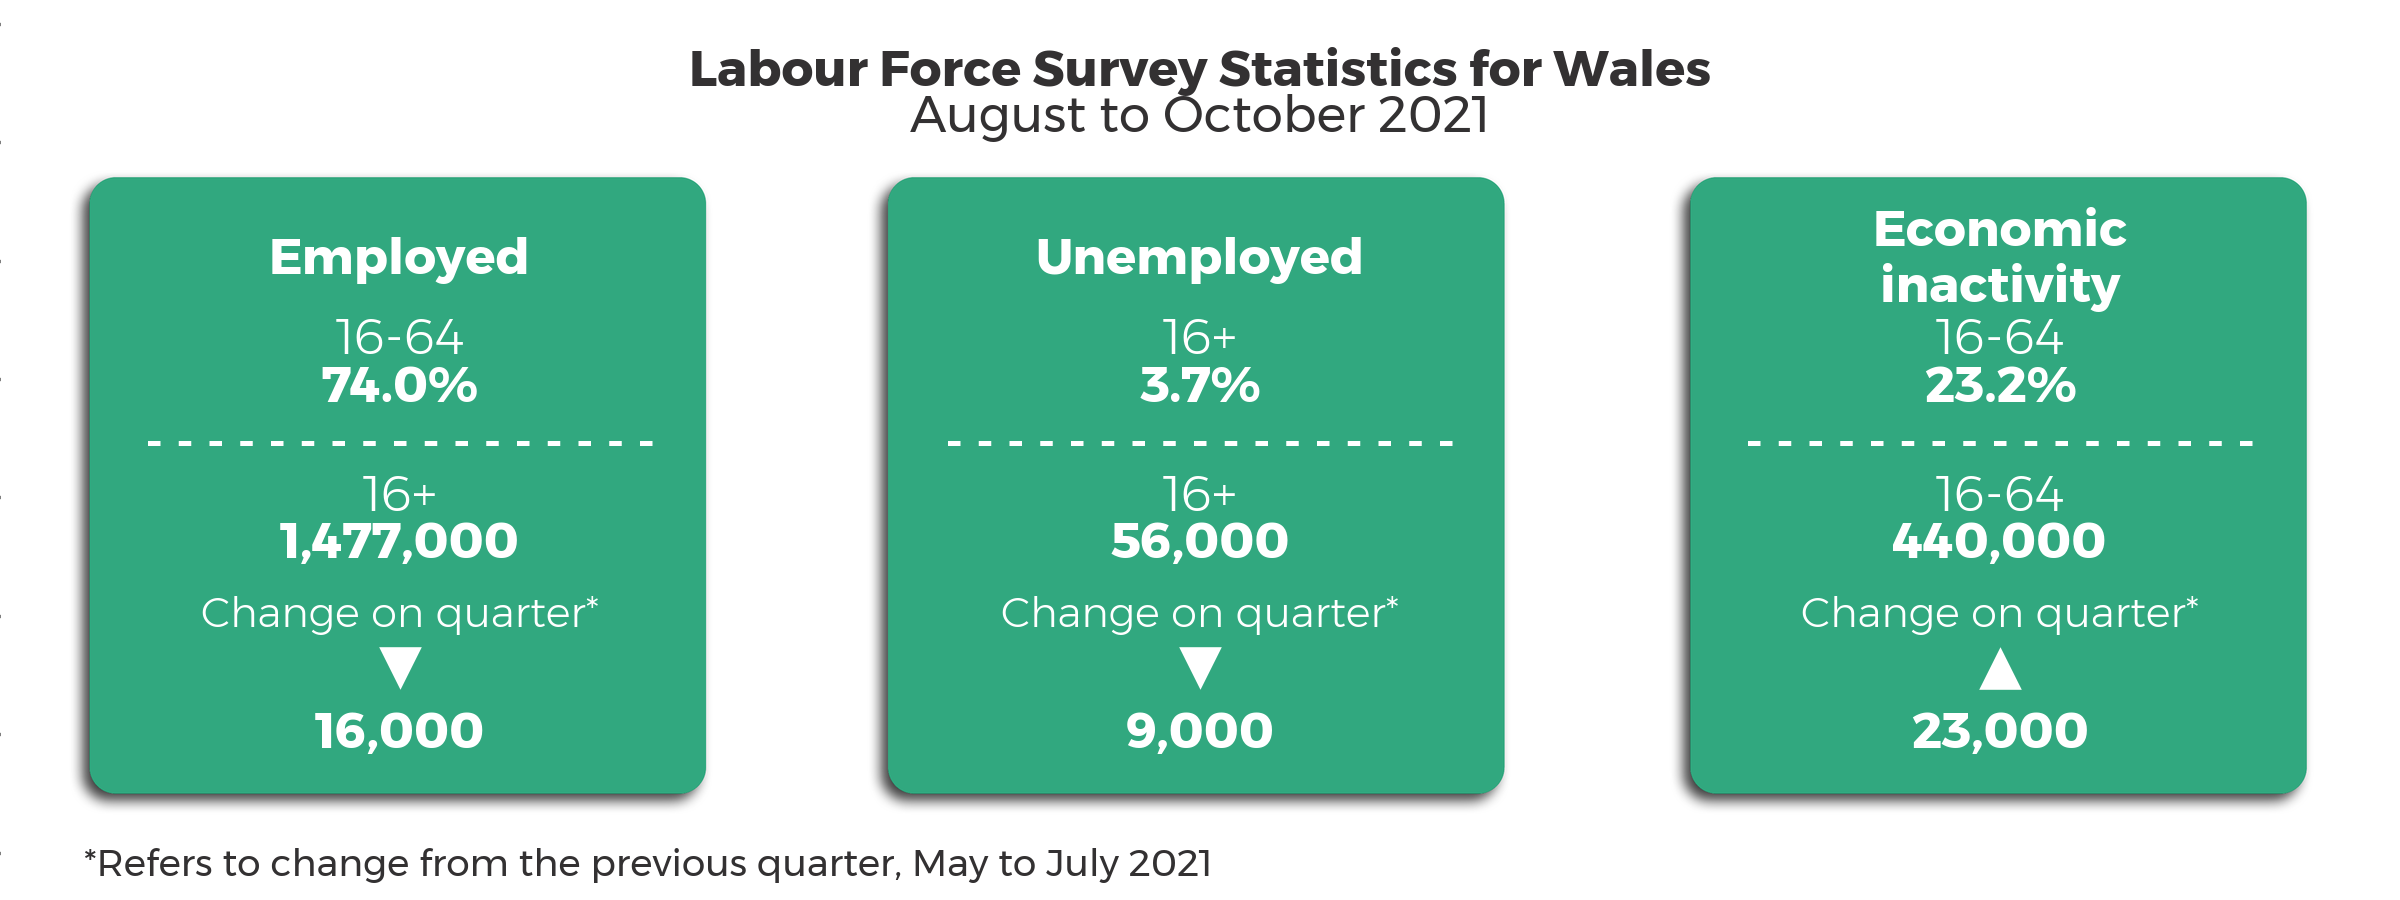 Headline statistics August 2021 to October 2021 compared to the previous quarter May 2021 to July 2021. The 16+ unemployment rate is 3.7% with 56,000 people unemployed, a decrease of 9,000 from the previous quarter. The 16-64 employment rate is 74.0%. 1,477,000 people aged 16+ employed, a decrease of 16,000 from the previous quarter. The 16-64 economic inactivity rate is 23.2% with 440,000 people economically active, an increase of 23,000 on the previous quarter.